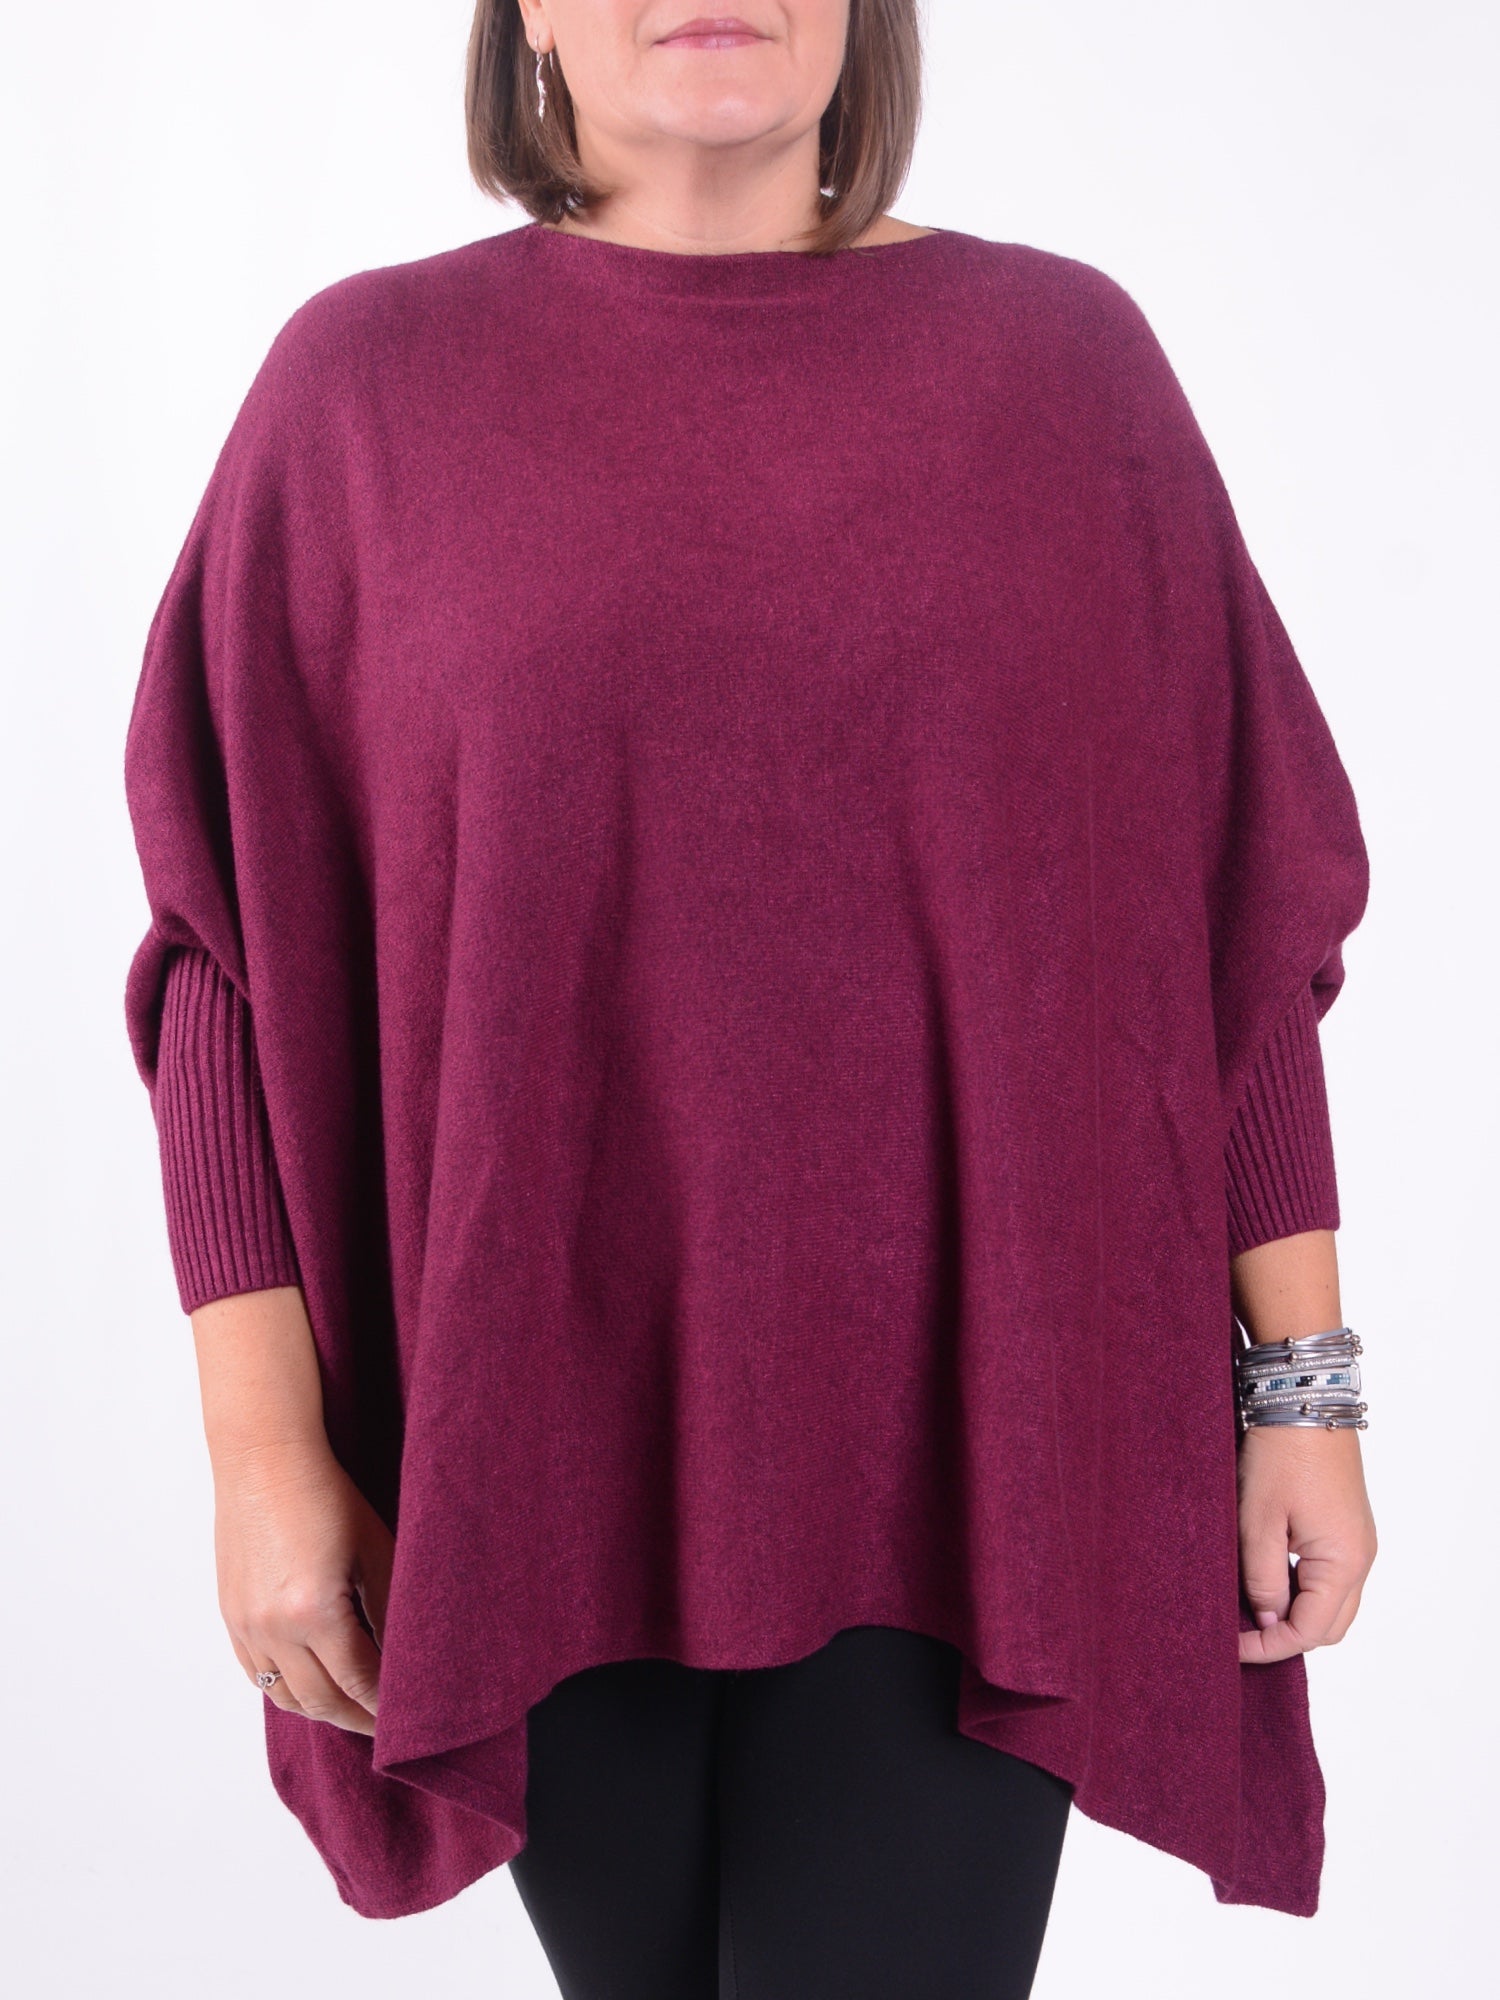 Soft Knit Batwing Sleeve Poncho Jumper  - 2700, Jumpers & Cardigans, Pure Plus Clothing, Lagenlook Clothing, Plus Size Fashion, Over 50 Fashion